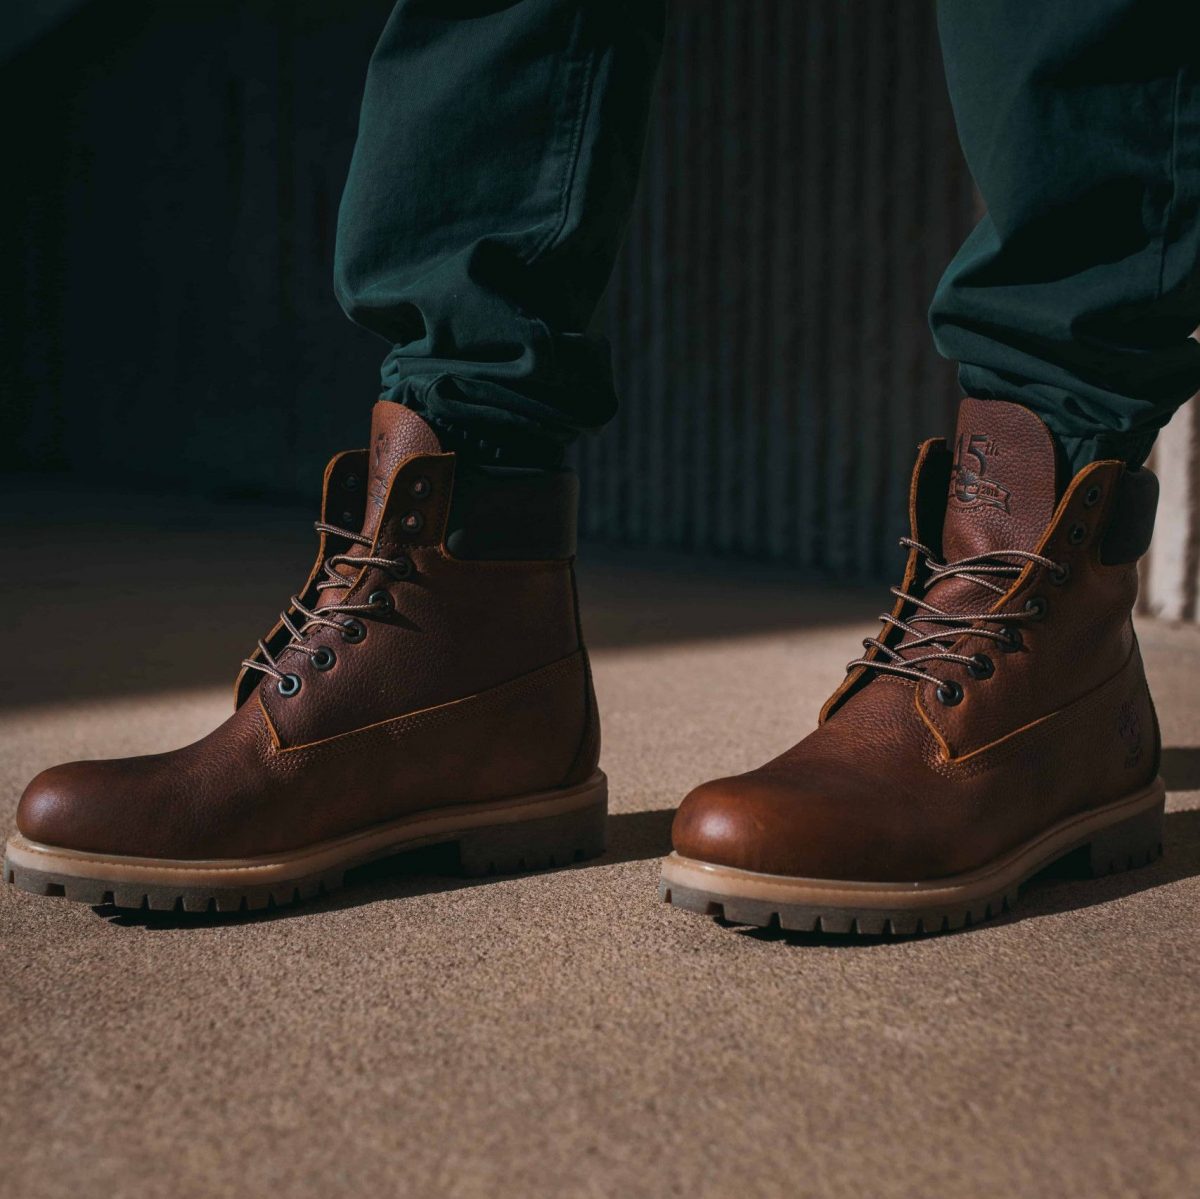 Best Men's Boots - Read This First